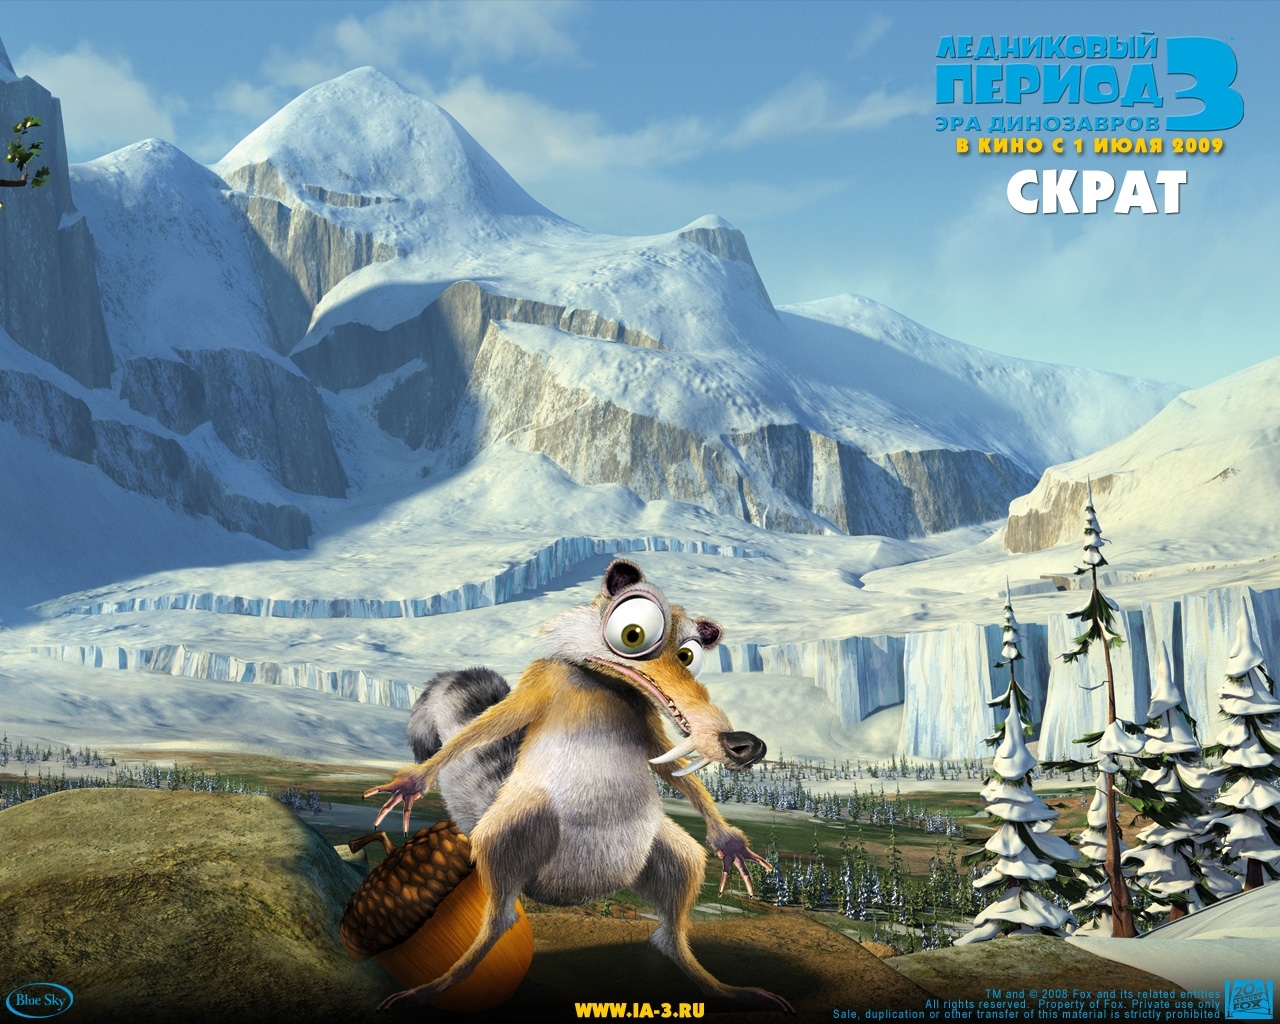 Best Ice Age phone Wallpapers